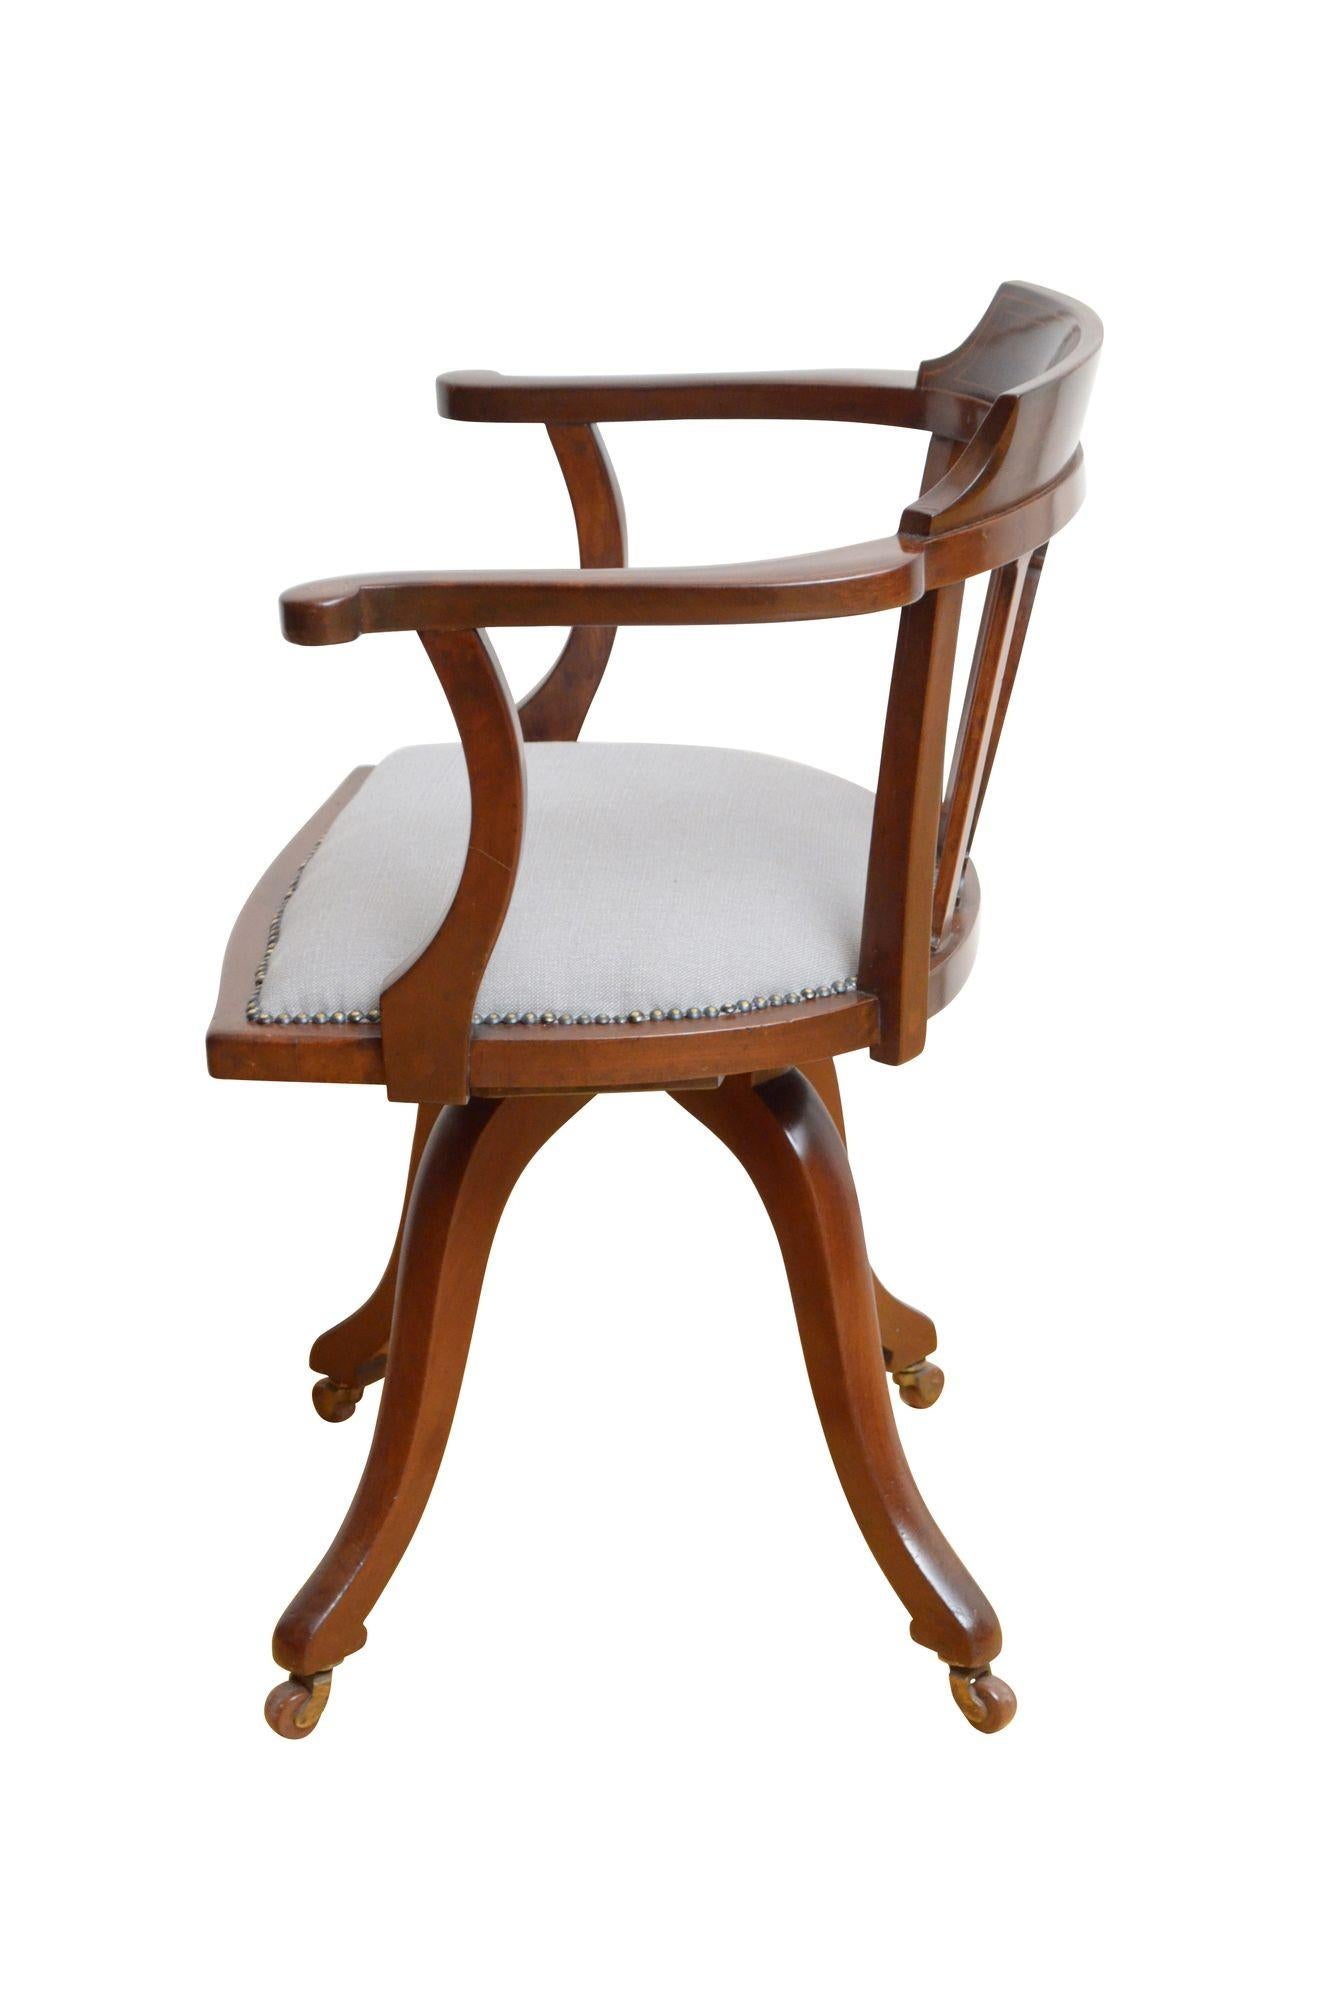 Fine English Edwardian Revolving Desk Chair In Good Condition For Sale In Whaley Bridge, GB